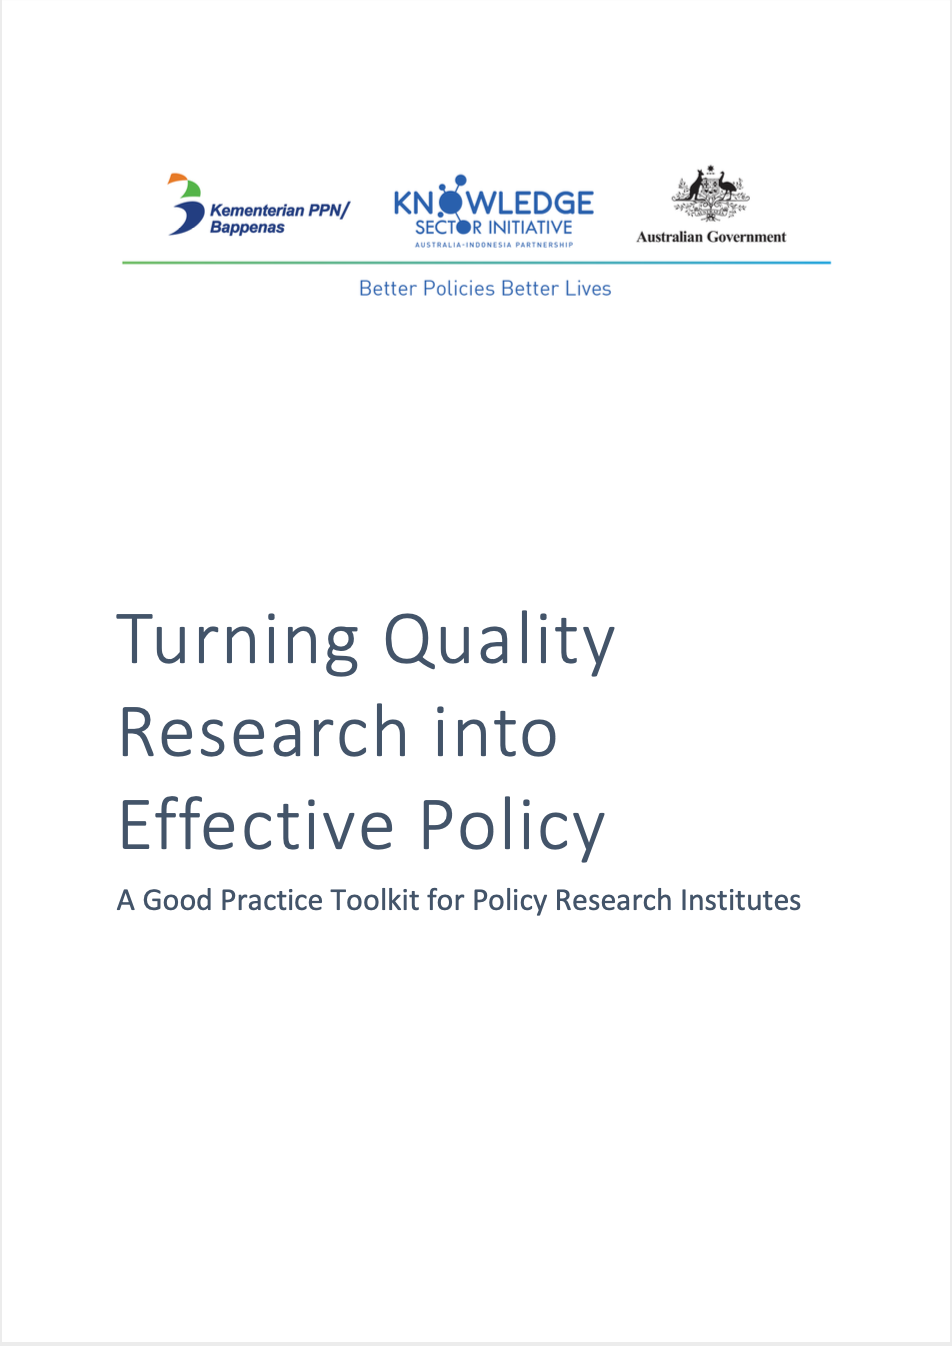 Turning Quality Research into Effective Policy - A Good Practice Toolkit for Policy Research Institutes